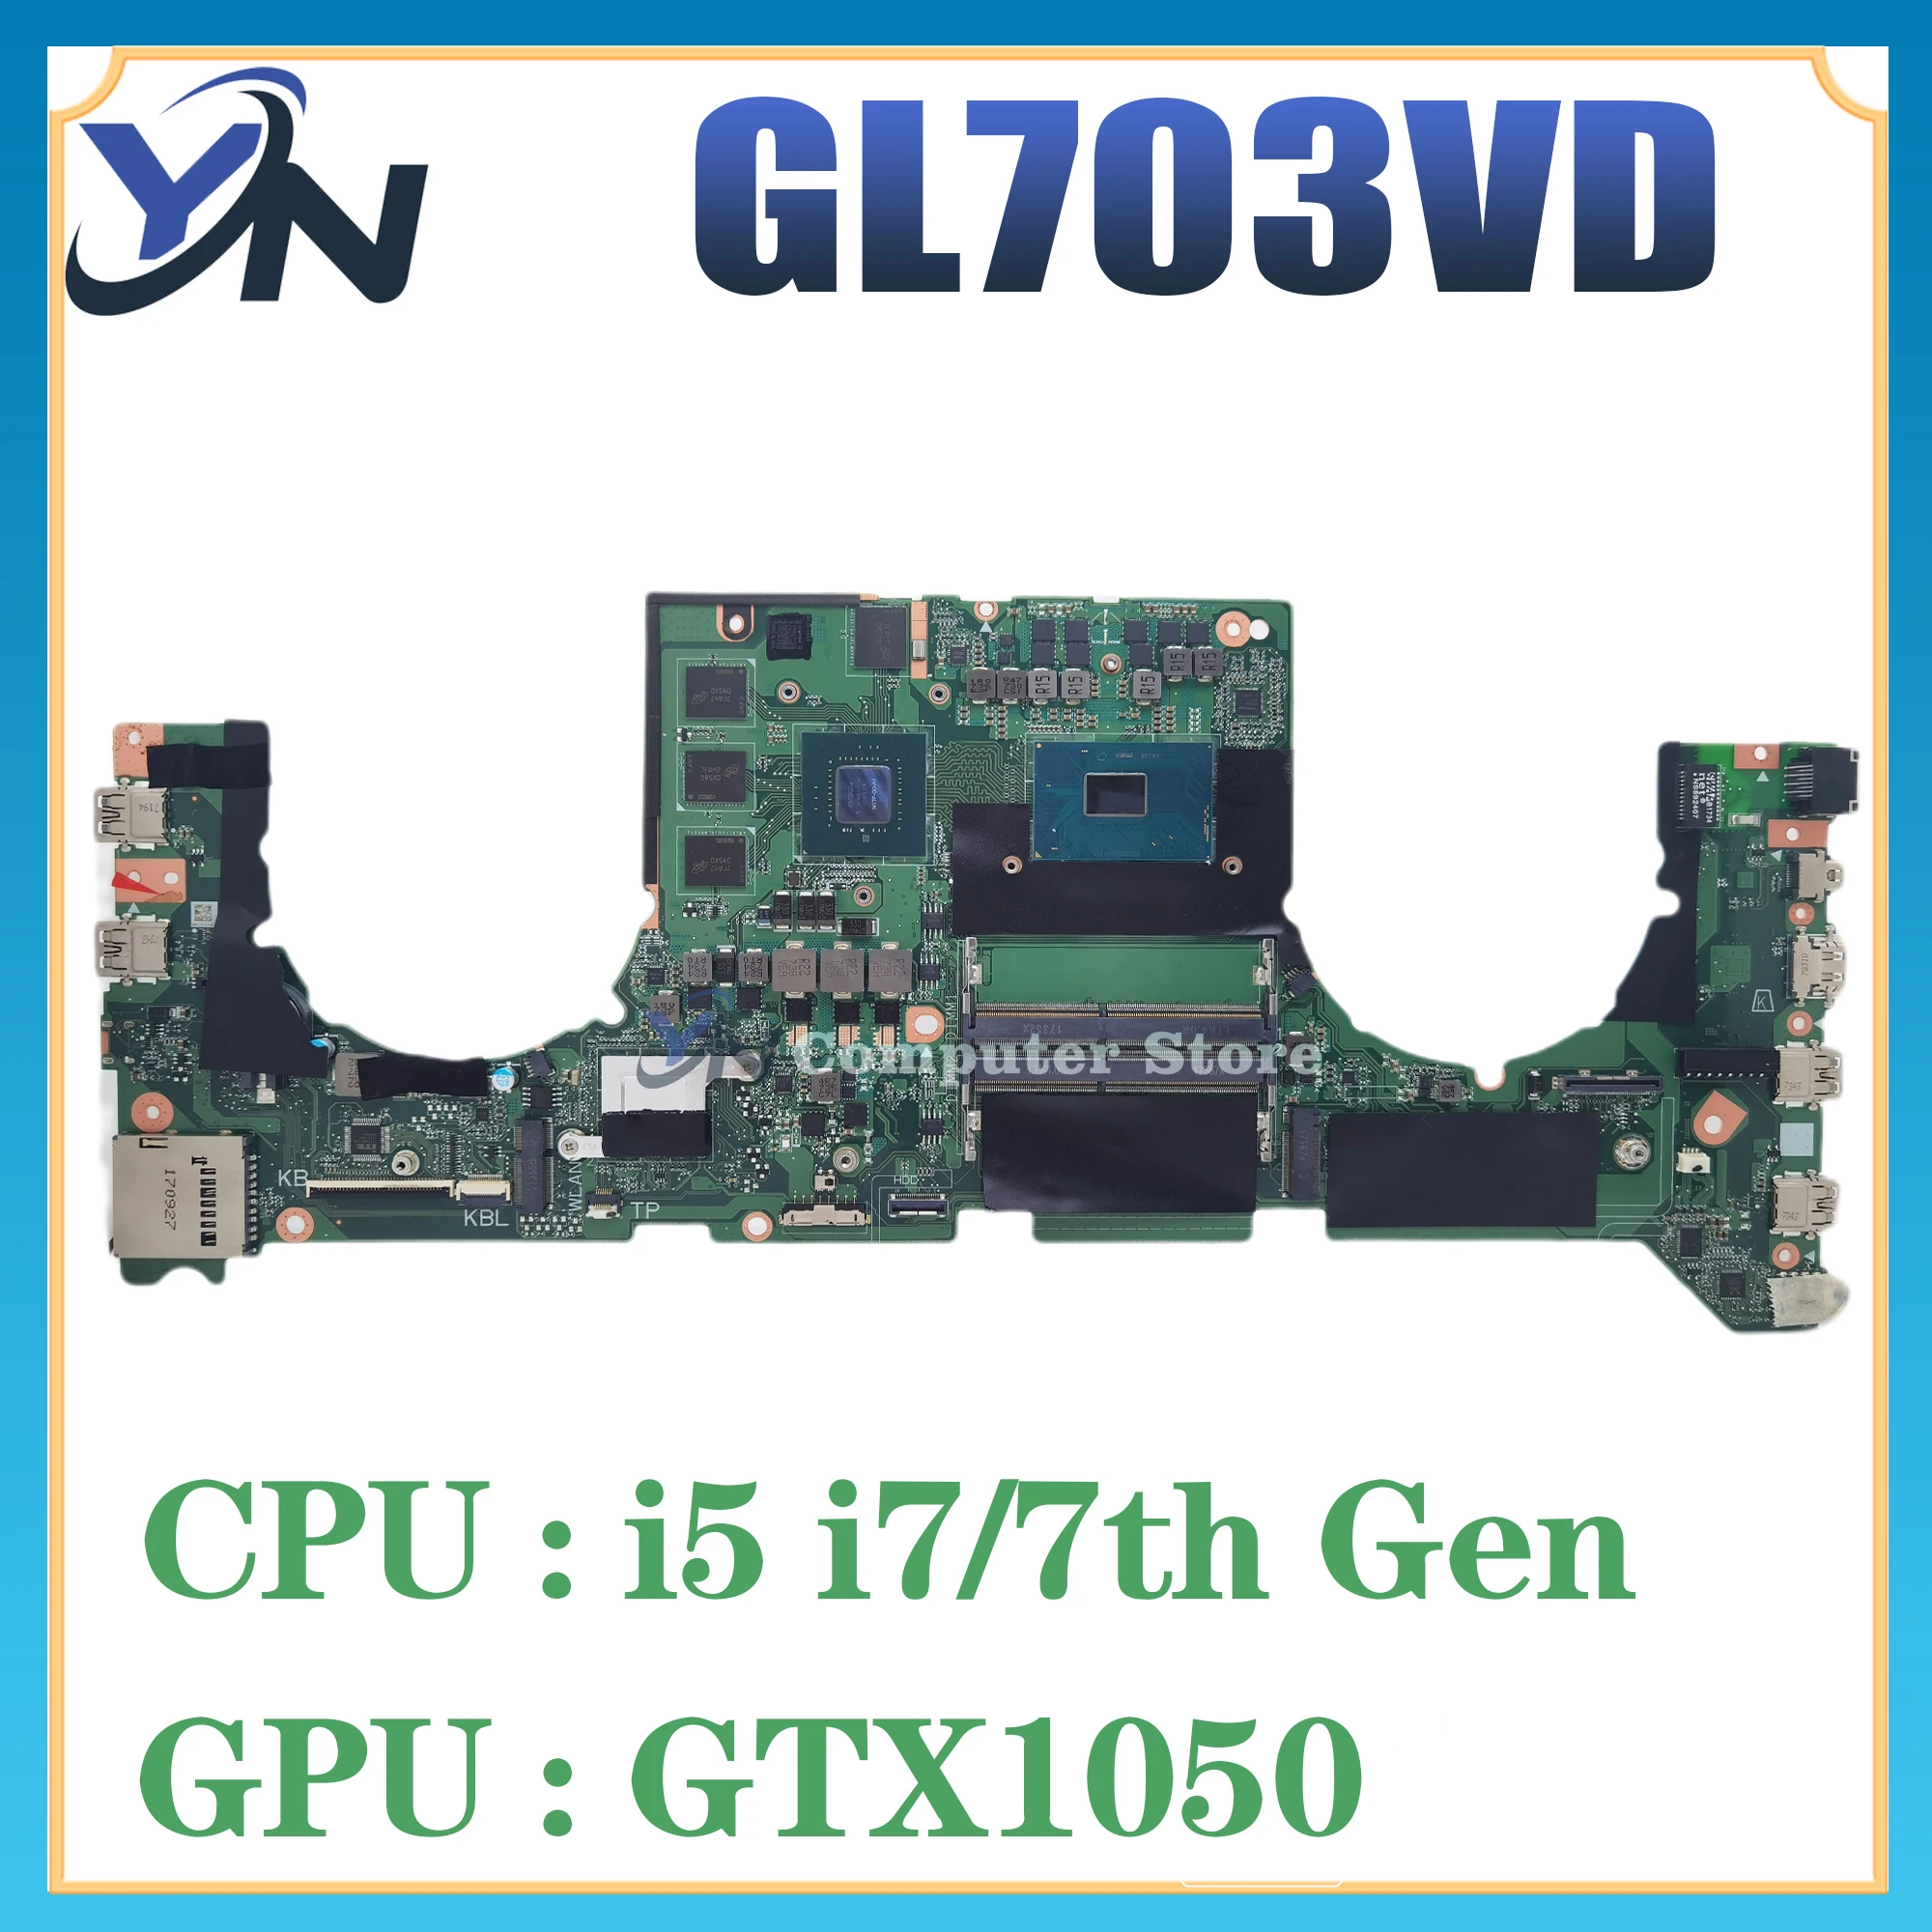 

GL703VD (DABKNMB28A0) Laptop Motherboard For ASUS ROG STRIX GL703VD Mainboard I5-7300HQ I7-7700HQ (N17P-G0-A1) 100% Test OK